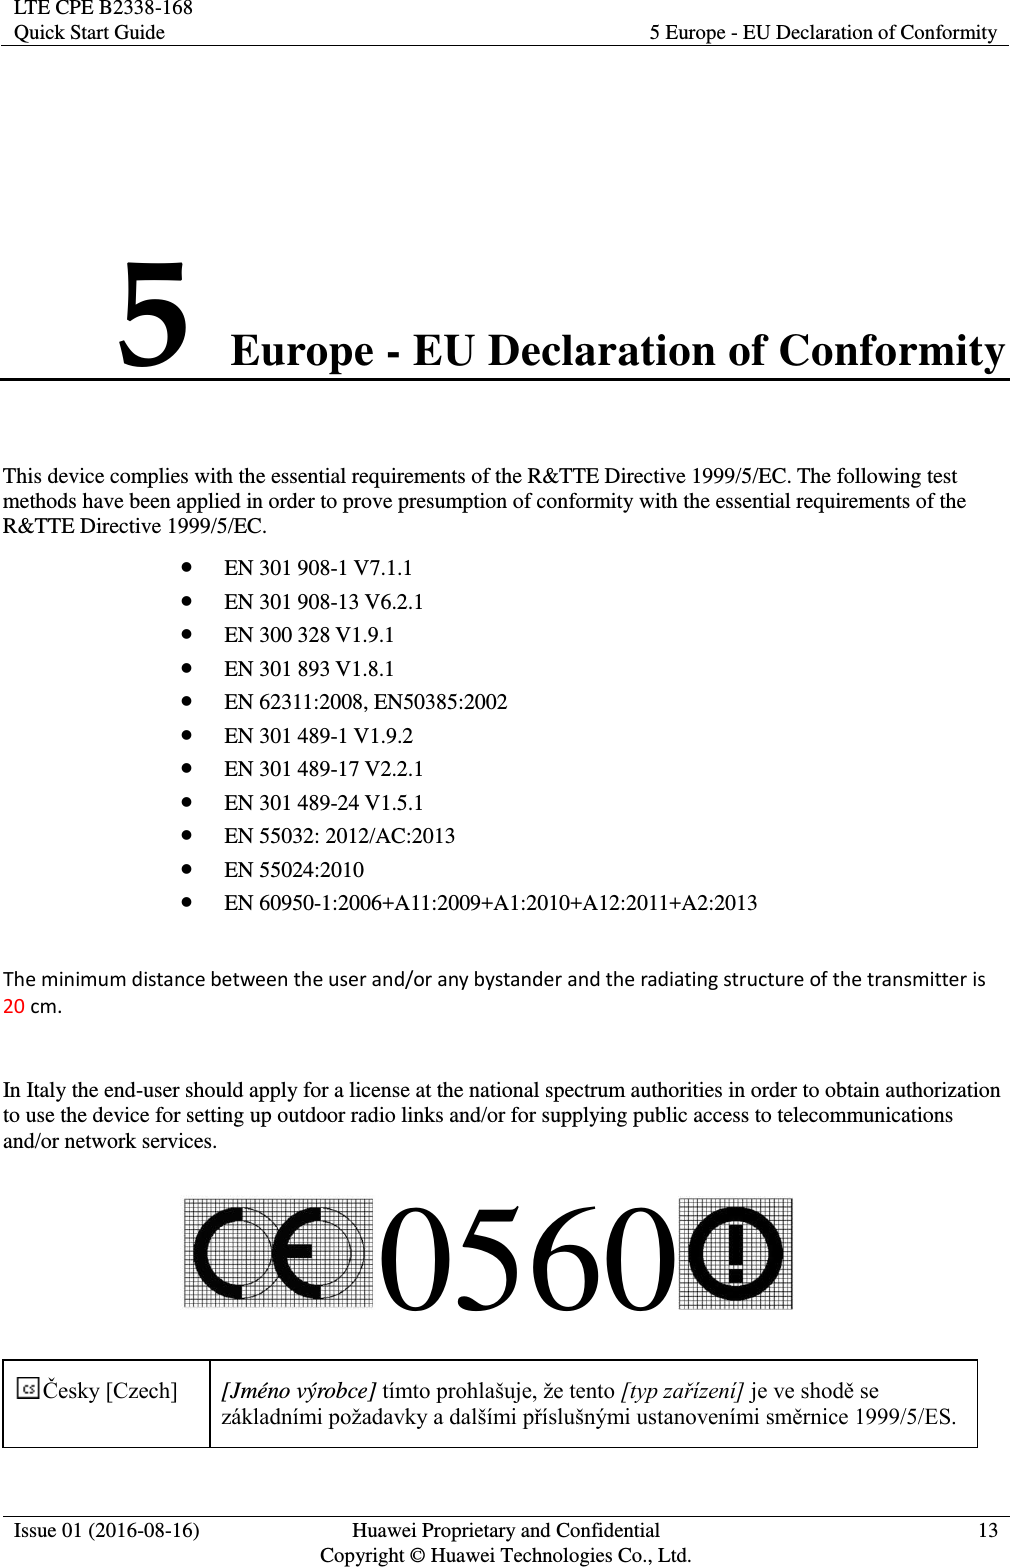 LTE CPE B2338-168 Quick Start Guide 5 Europe - EU Declaration of Conformity  Issue 01 (2016-08-16) Huawei Proprietary and Confidential         Copyright © Huawei Technologies Co., Ltd. 13  5 Europe - EU Declaration of Conformity This device complies with the essential requirements of the R&amp;TTE Directive 1999/5/EC. The following test methods have been applied in order to prove presumption of conformity with the essential requirements of the R&amp;TTE Directive 1999/5/EC.  EN 301 908-1 V7.1.1  EN 301 908-13 V6.2.1  EN 300 328 V1.9.1  EN 301 893 V1.8.1  EN 62311:2008, EN50385:2002  EN 301 489-1 V1.9.2  EN 301 489-17 V2.2.1  EN 301 489-24 V1.5.1  EN 55032: 2012/AC:2013  EN 55024:2010  EN 60950-1:2006+A11:2009+A1:2010+A12:2011+A2:2013  The minimum distance between the user and/or any bystander and the radiating structure of the transmitter is 20 cm.  In Italy the end-user should apply for a license at the national spectrum authorities in order to obtain authorization to use the device for setting up outdoor radio links and/or for supplying public access to telecommunications and/or network services. 0560   [Jméno výrobce] [typ zařízení]  